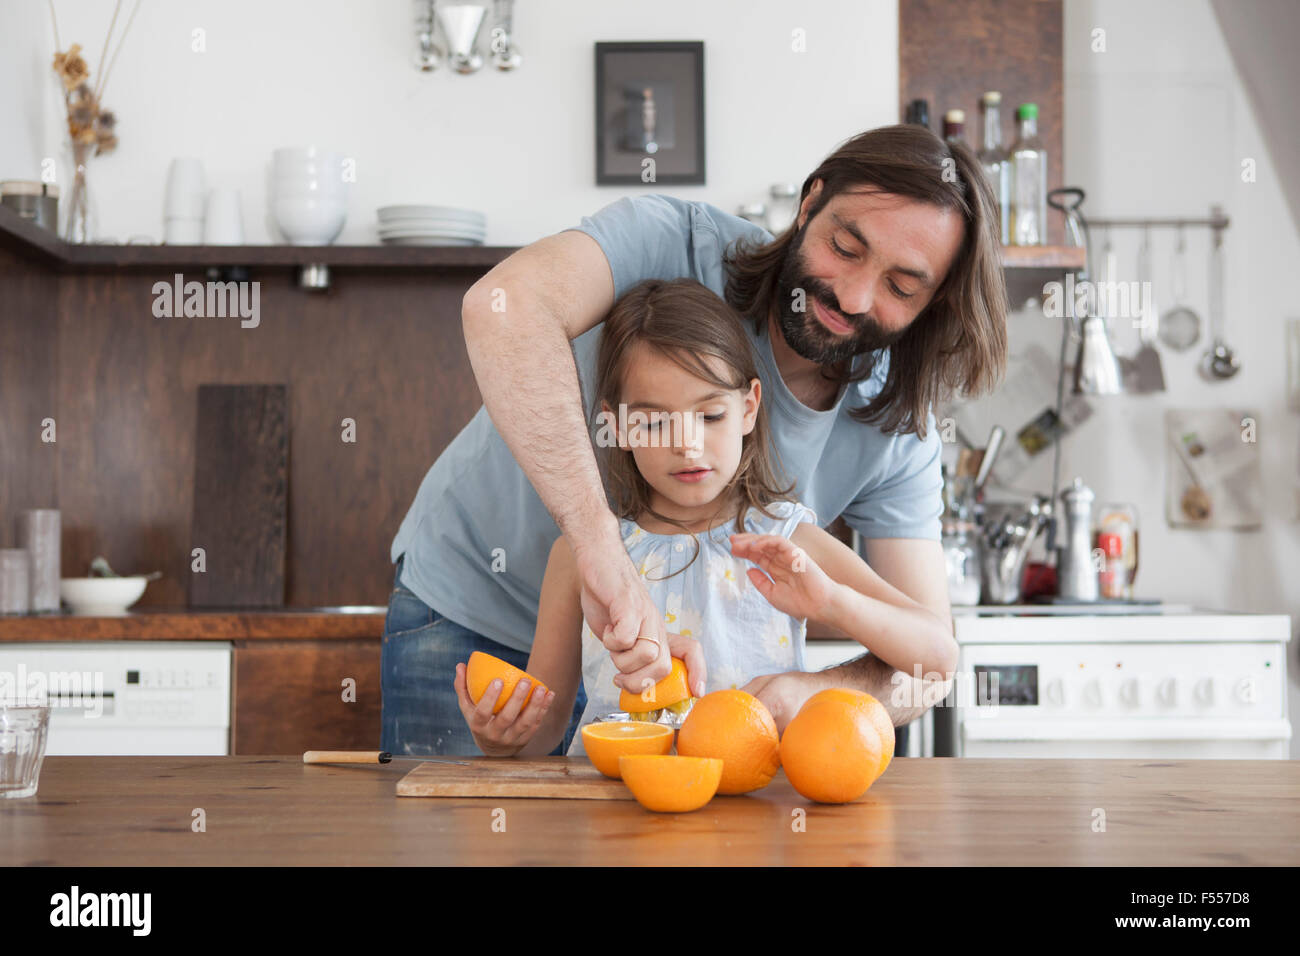 Father assisting daughter squeeze oranges in kitchen Stock Photo